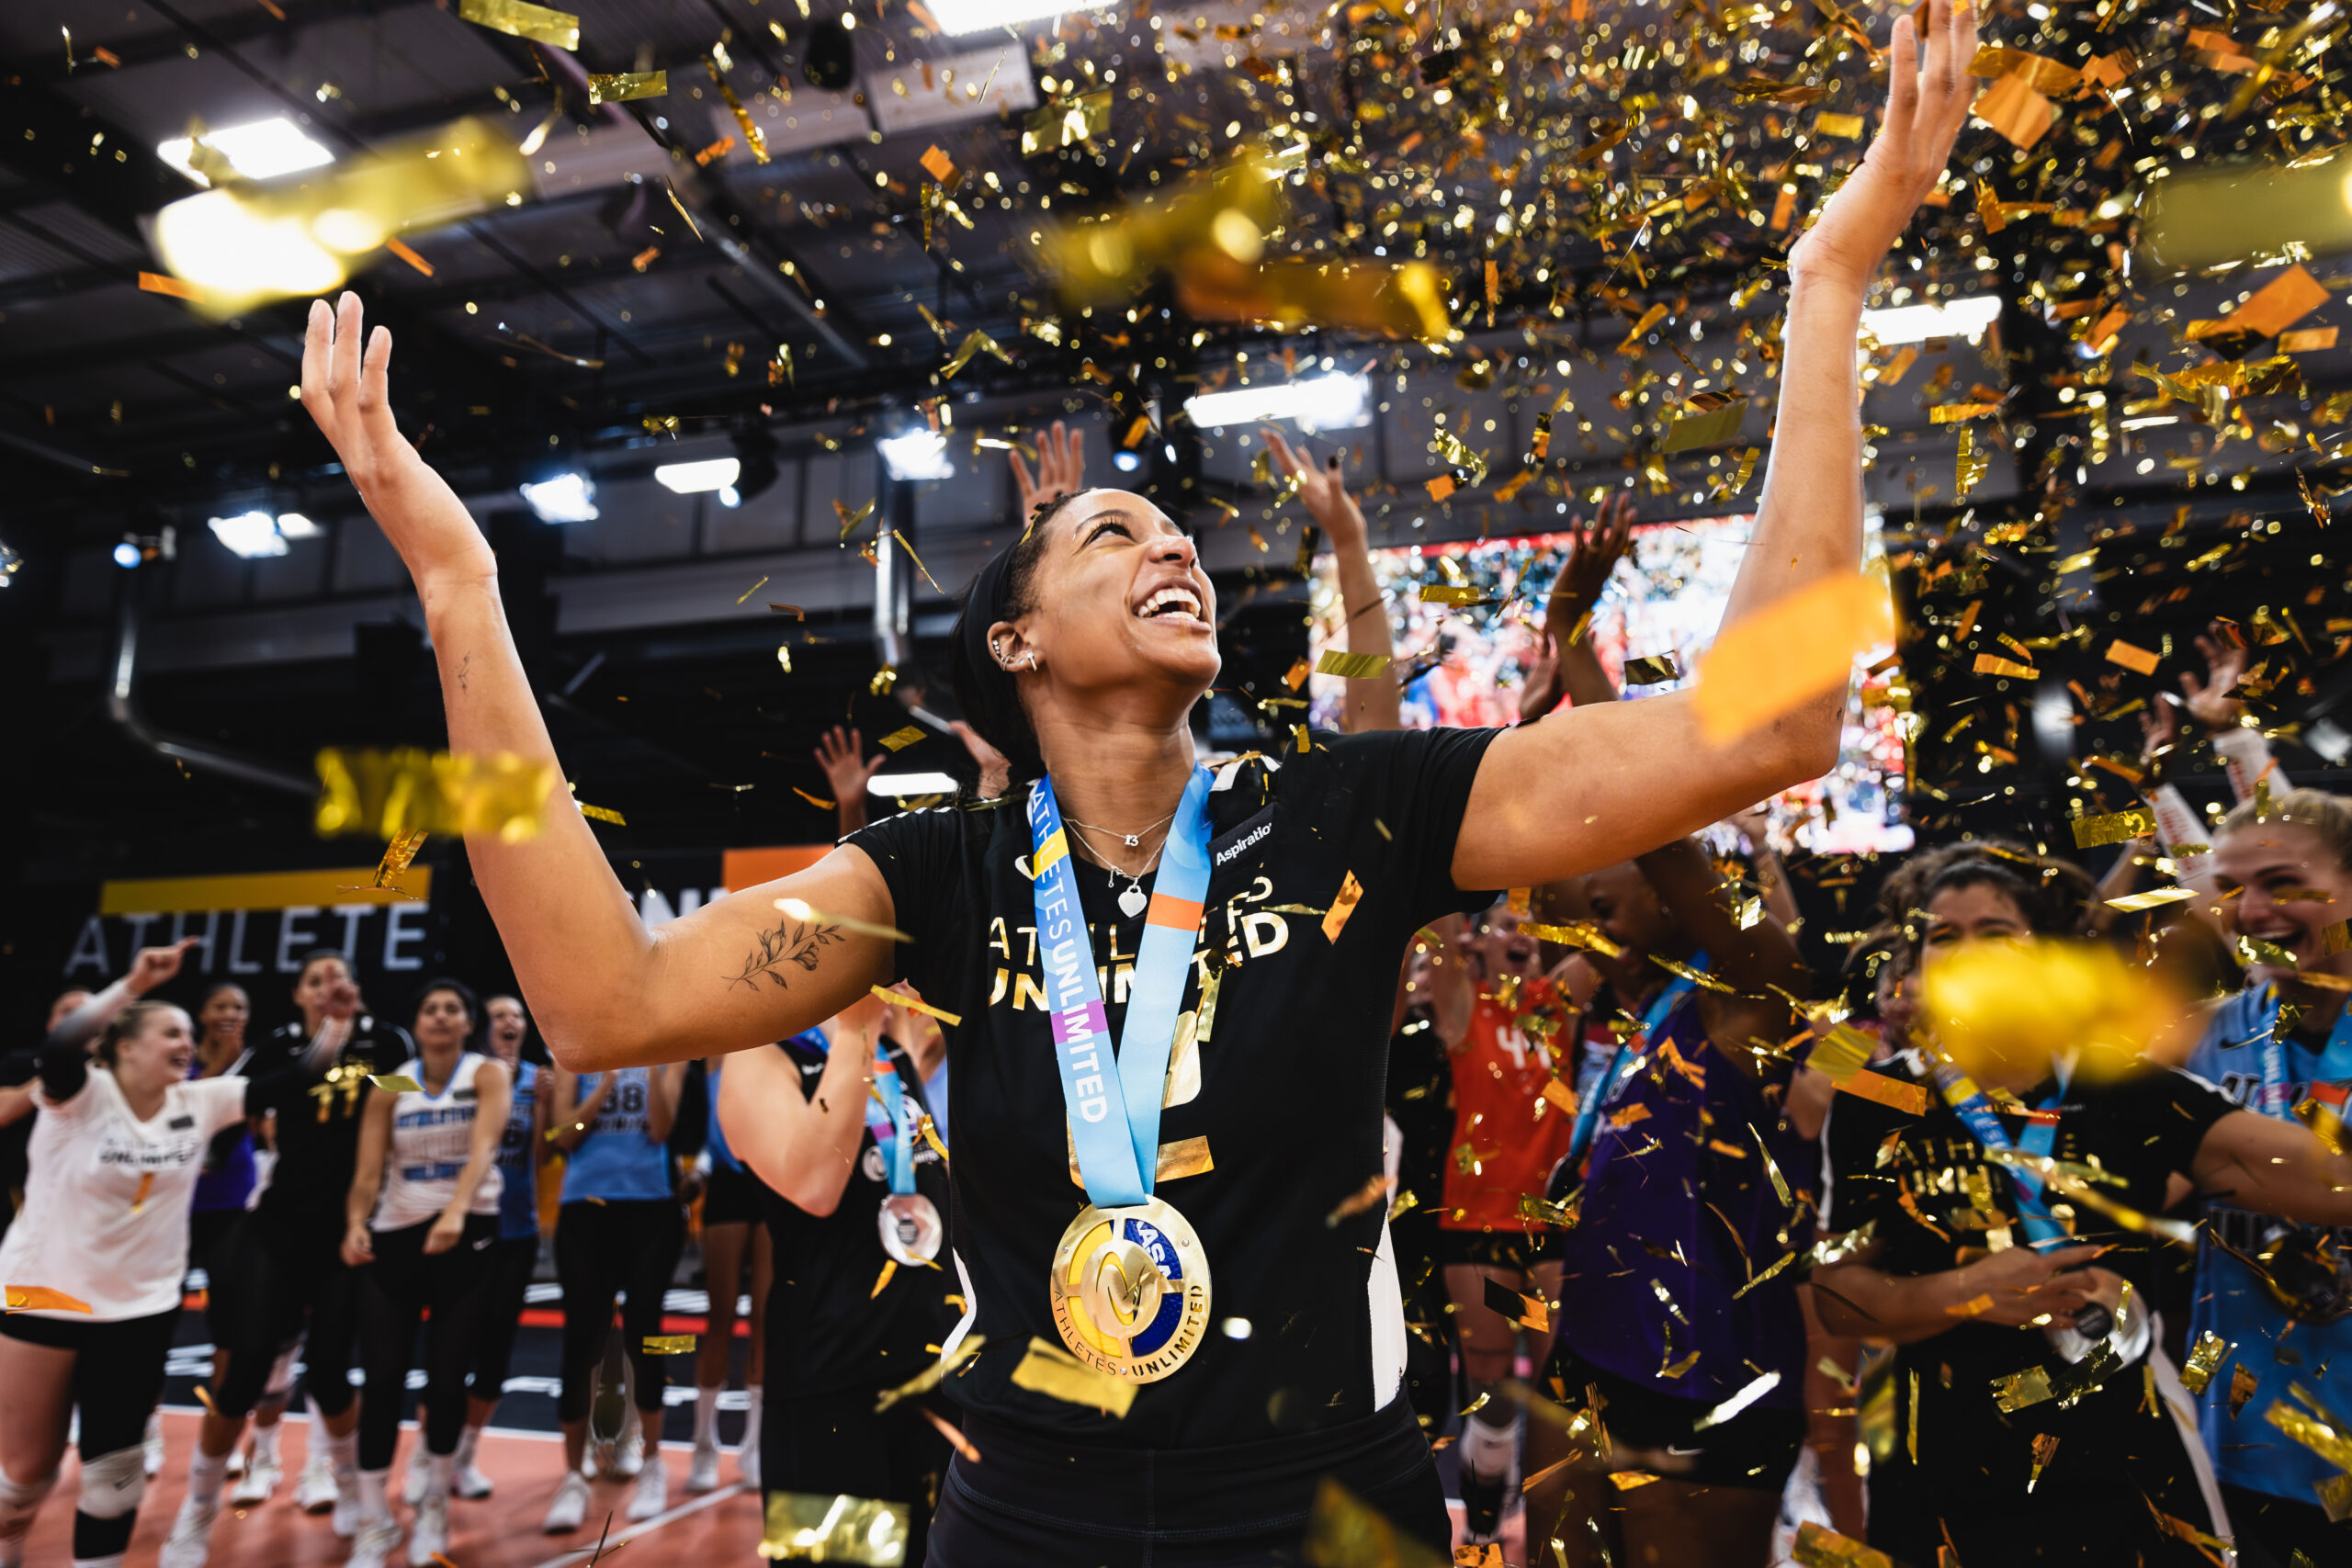 Leah Edmond celebrates her championship surrounded by gold confetti.